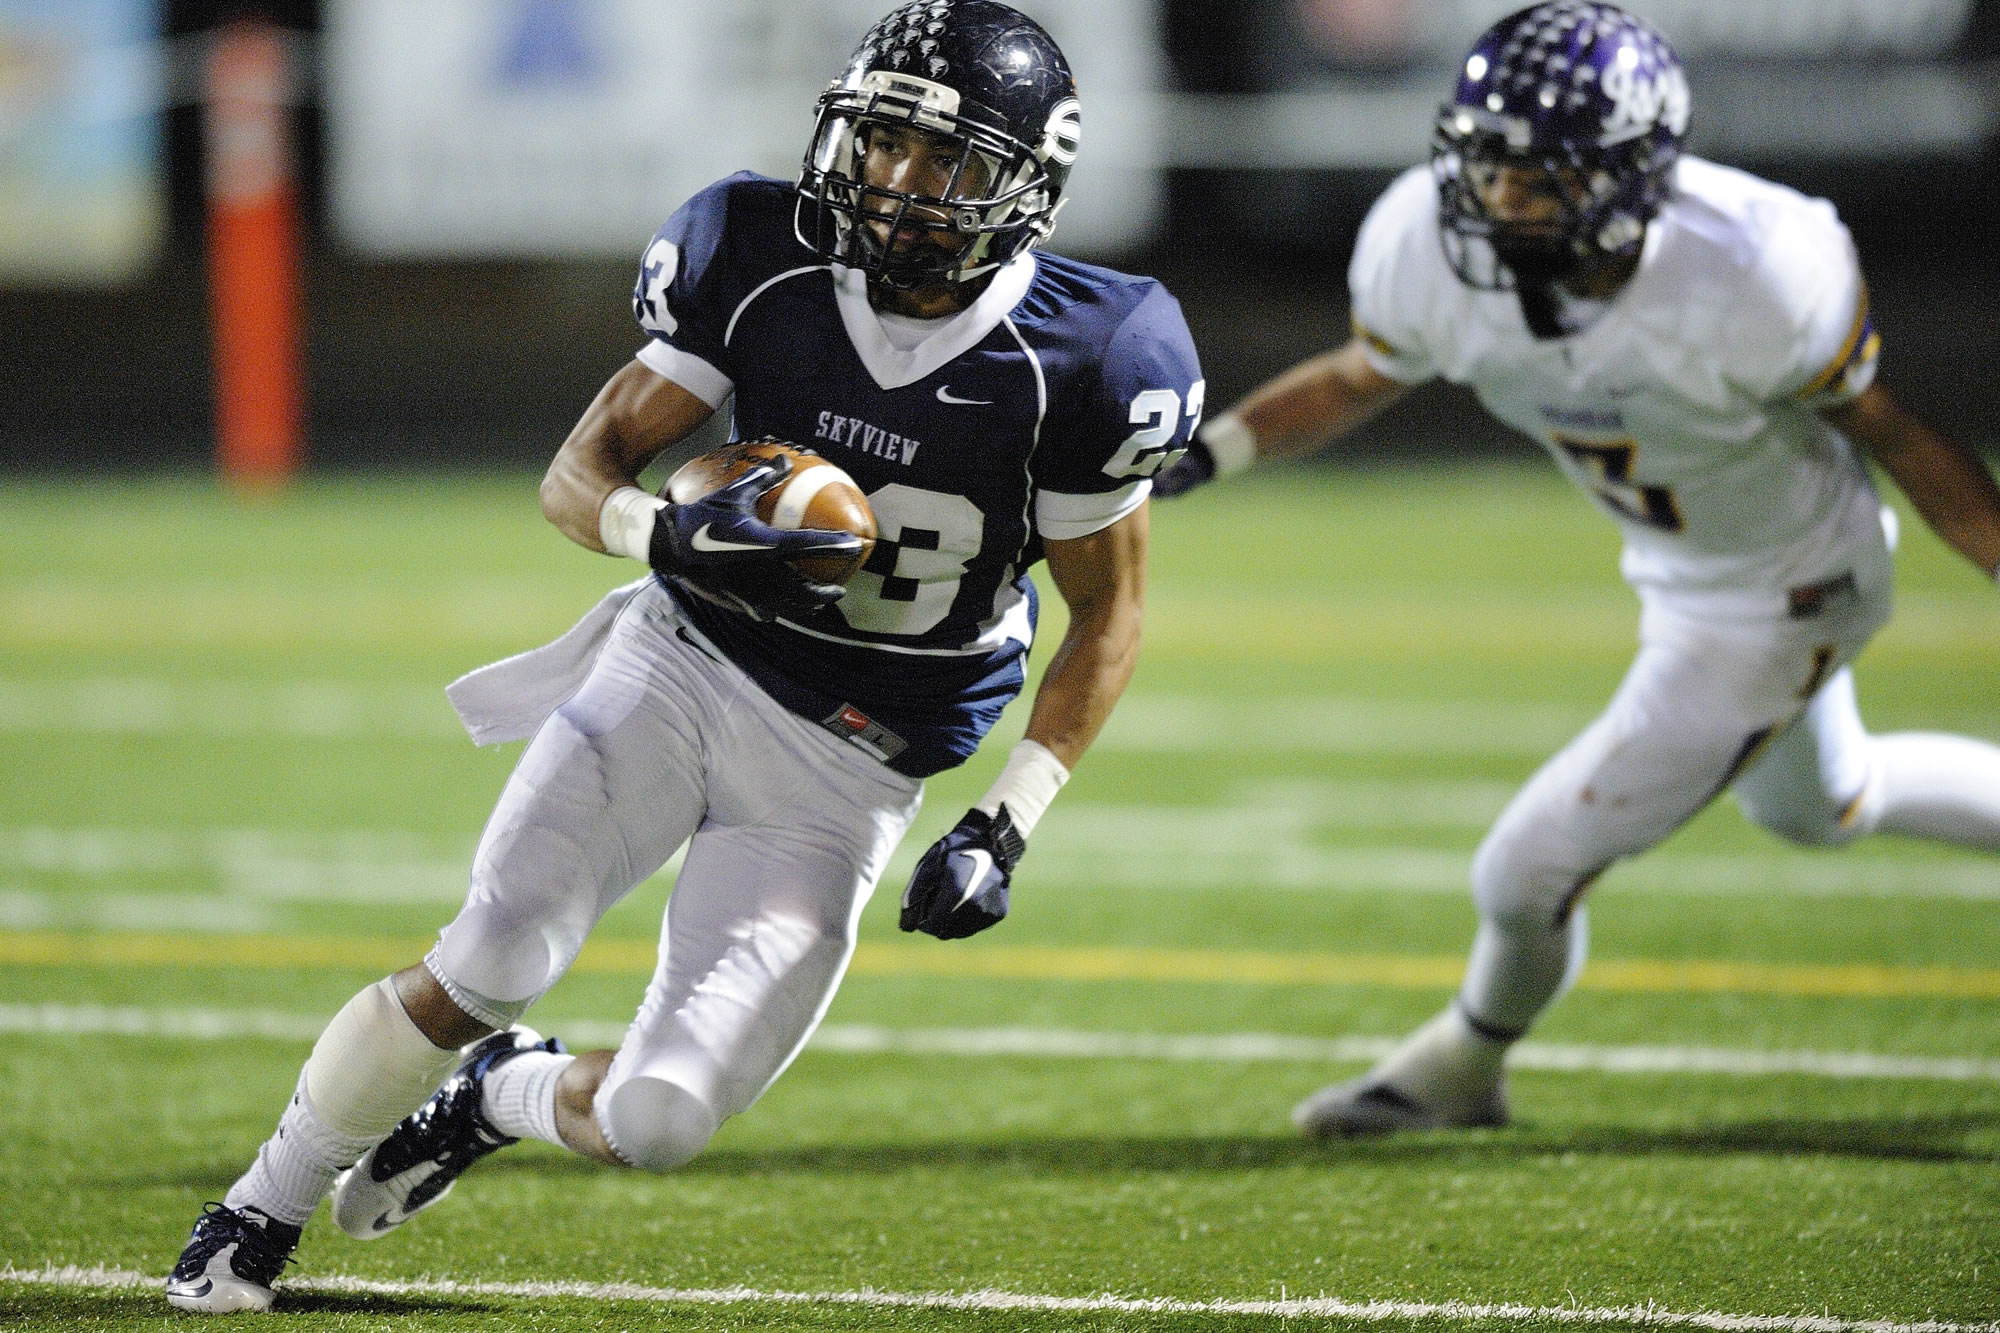 Skyview's Forrest Russell runs with the ball during a 4A playoff game last season against Issaquah